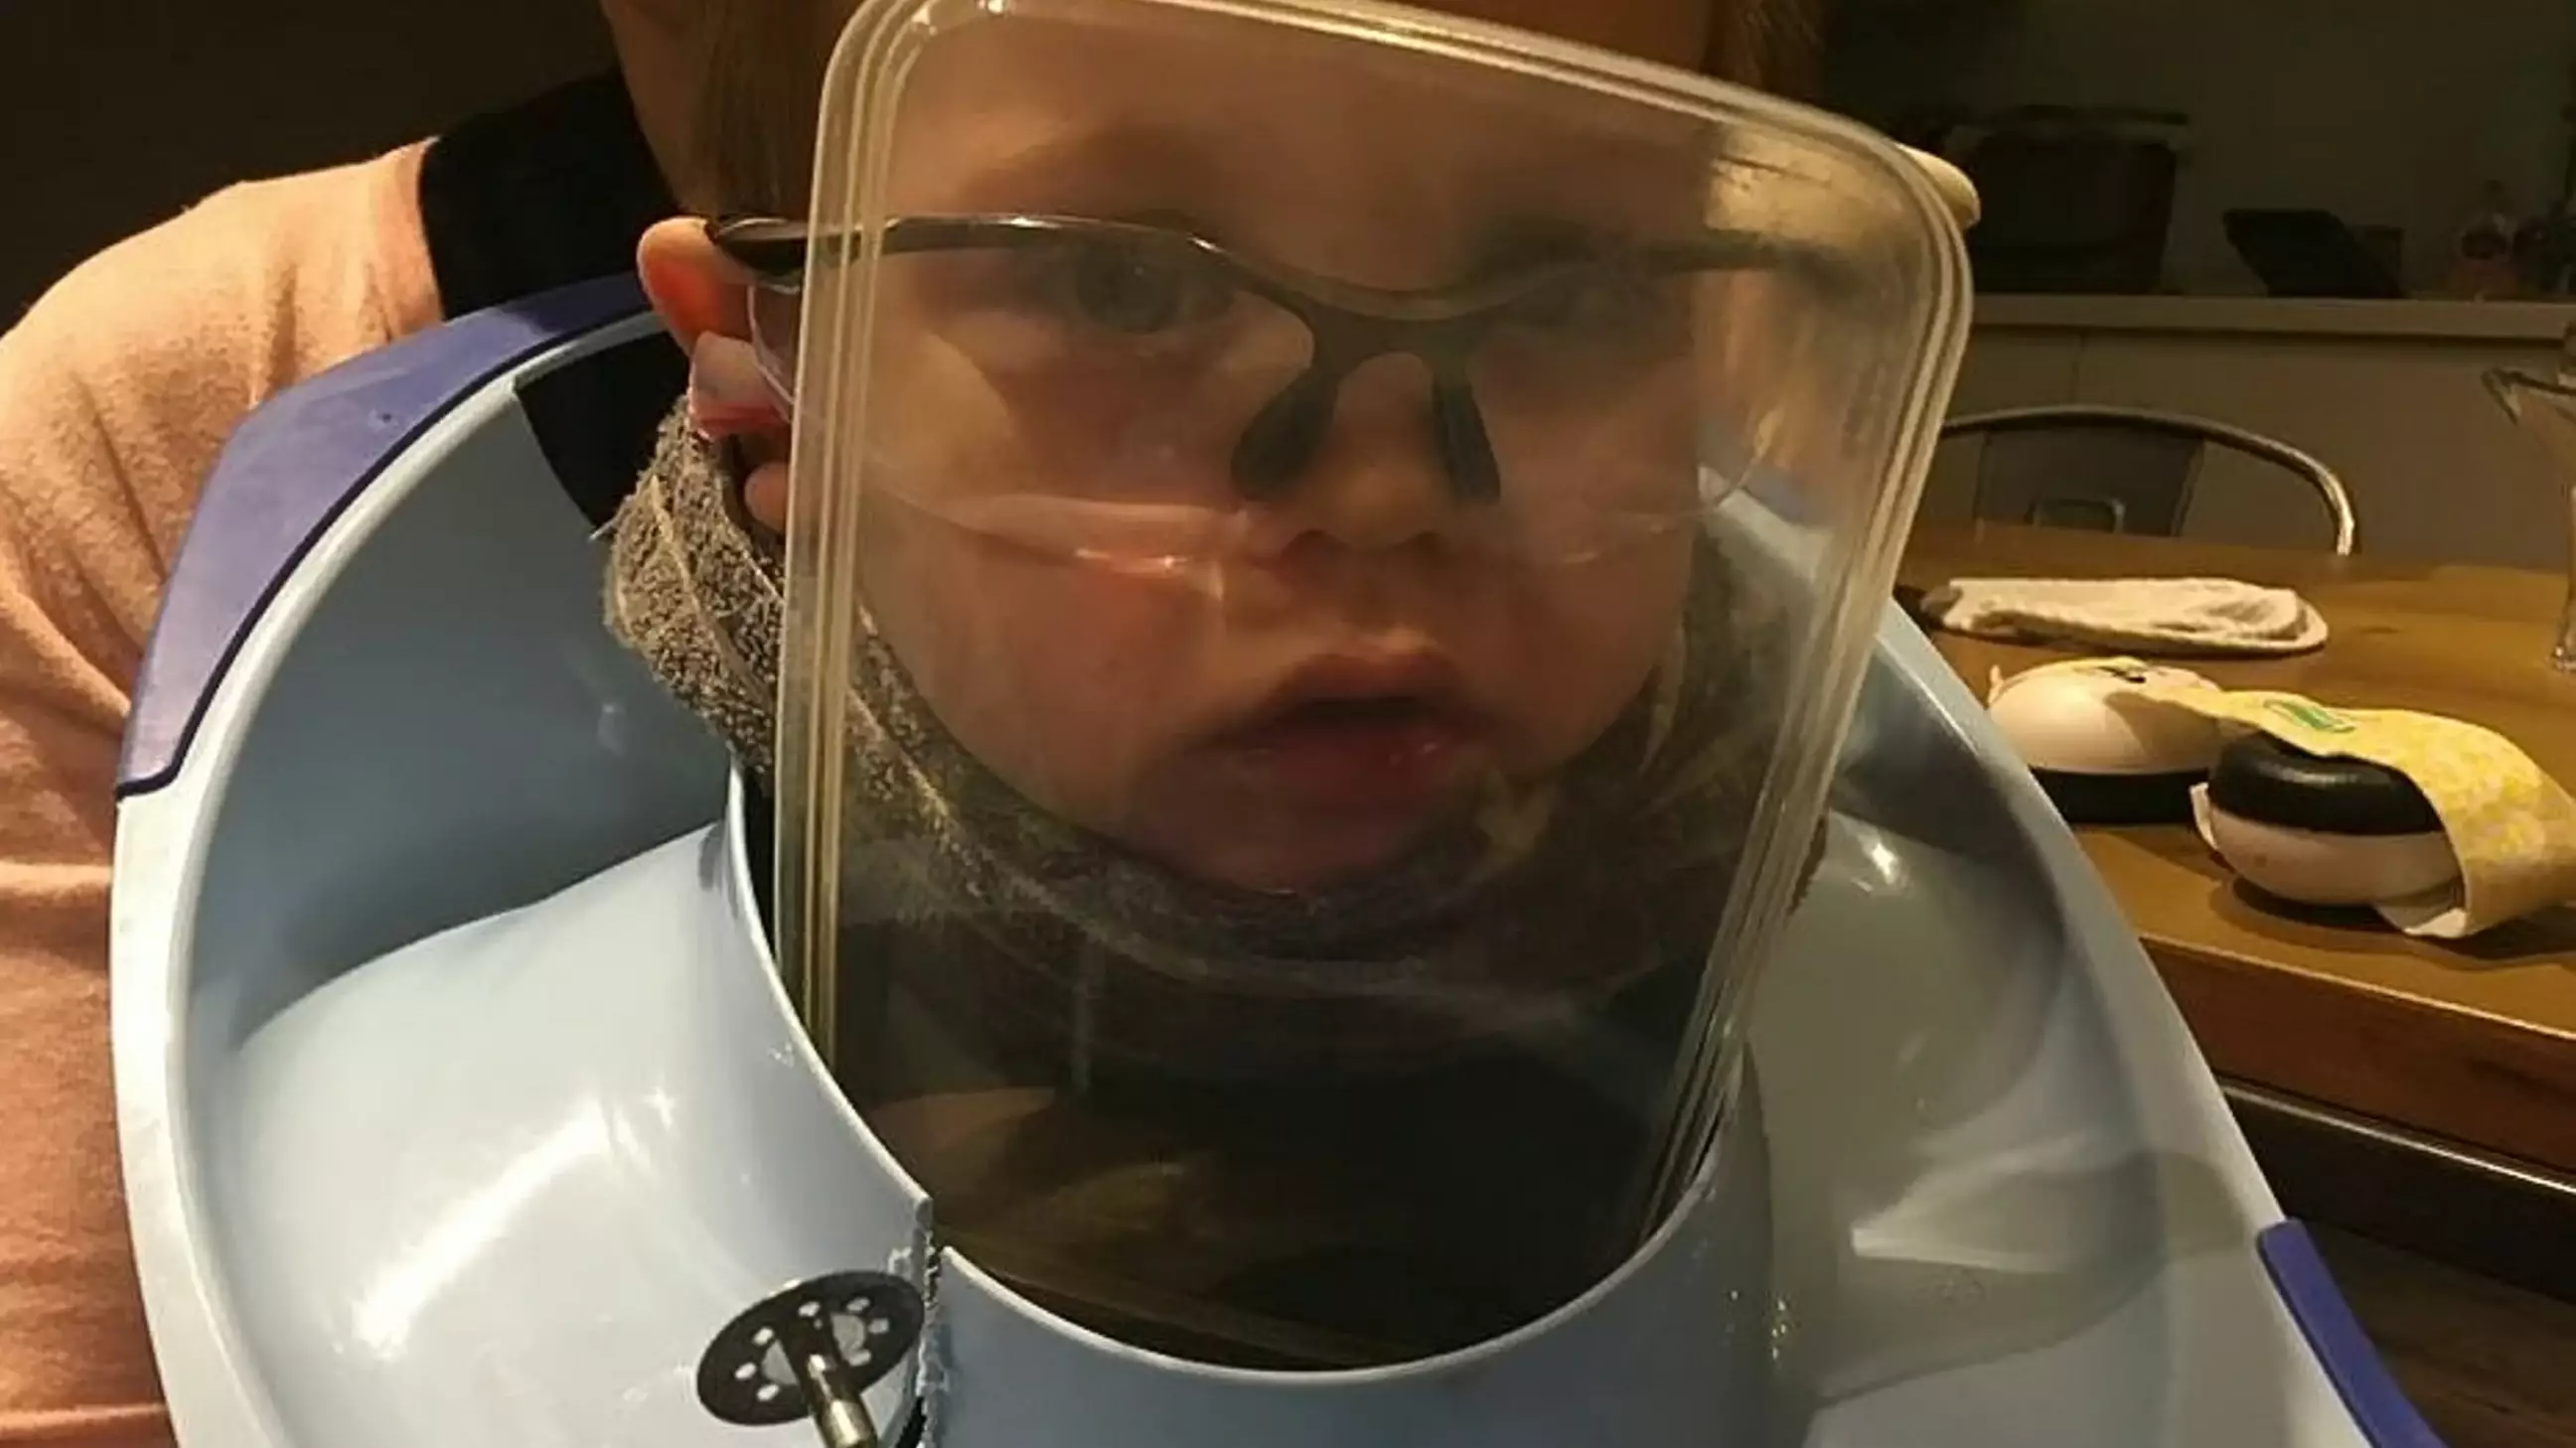 Little Boy Gets Toilet Seat Stuck On His Head, Has To Be Rescued With Disc Cutter 